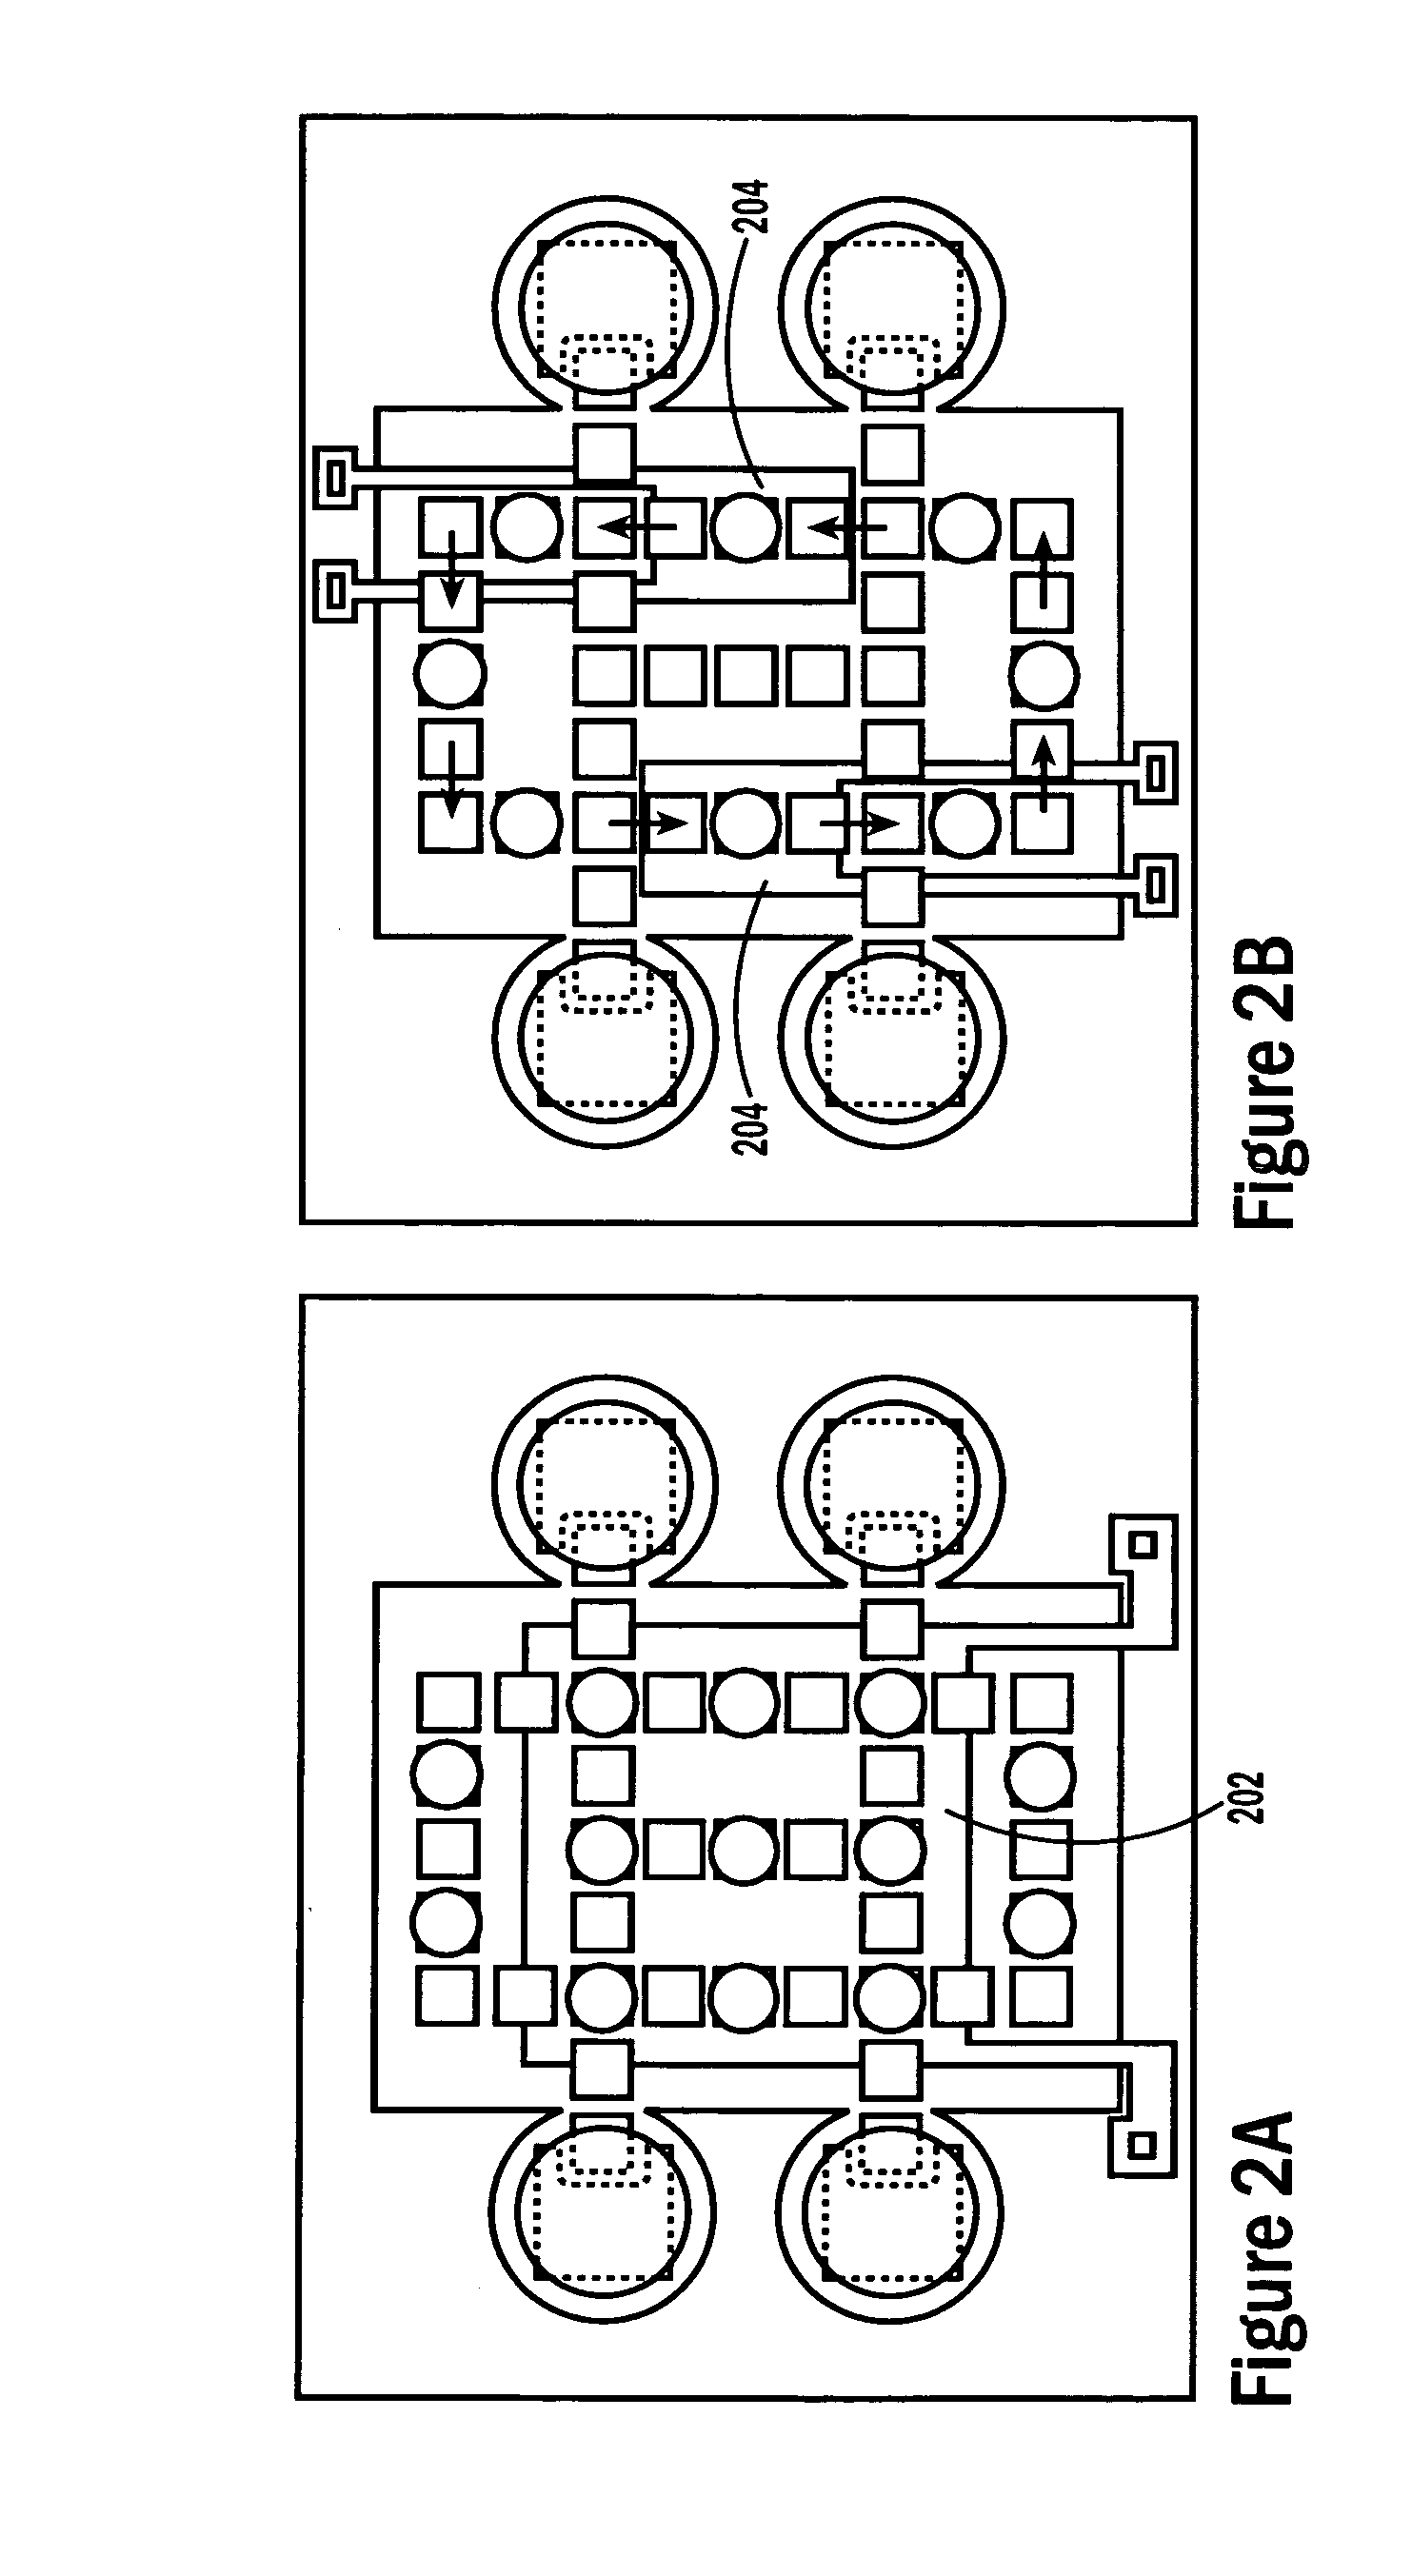 Droplet actuation system and method